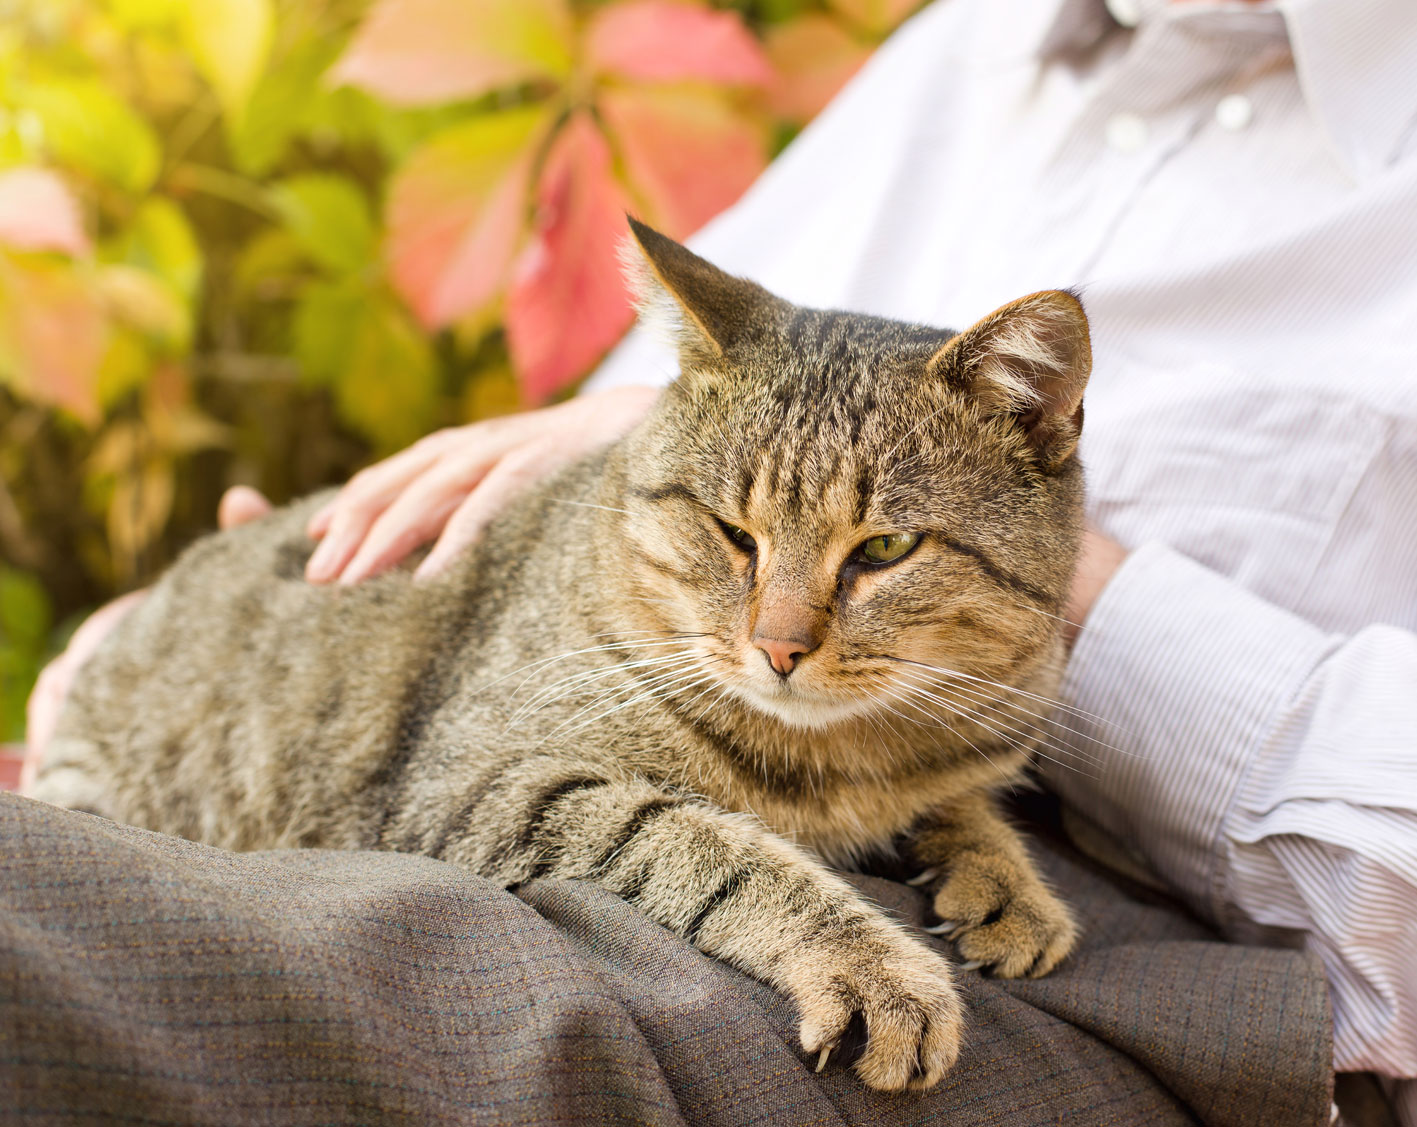 Fostering Affection in Aging Cats